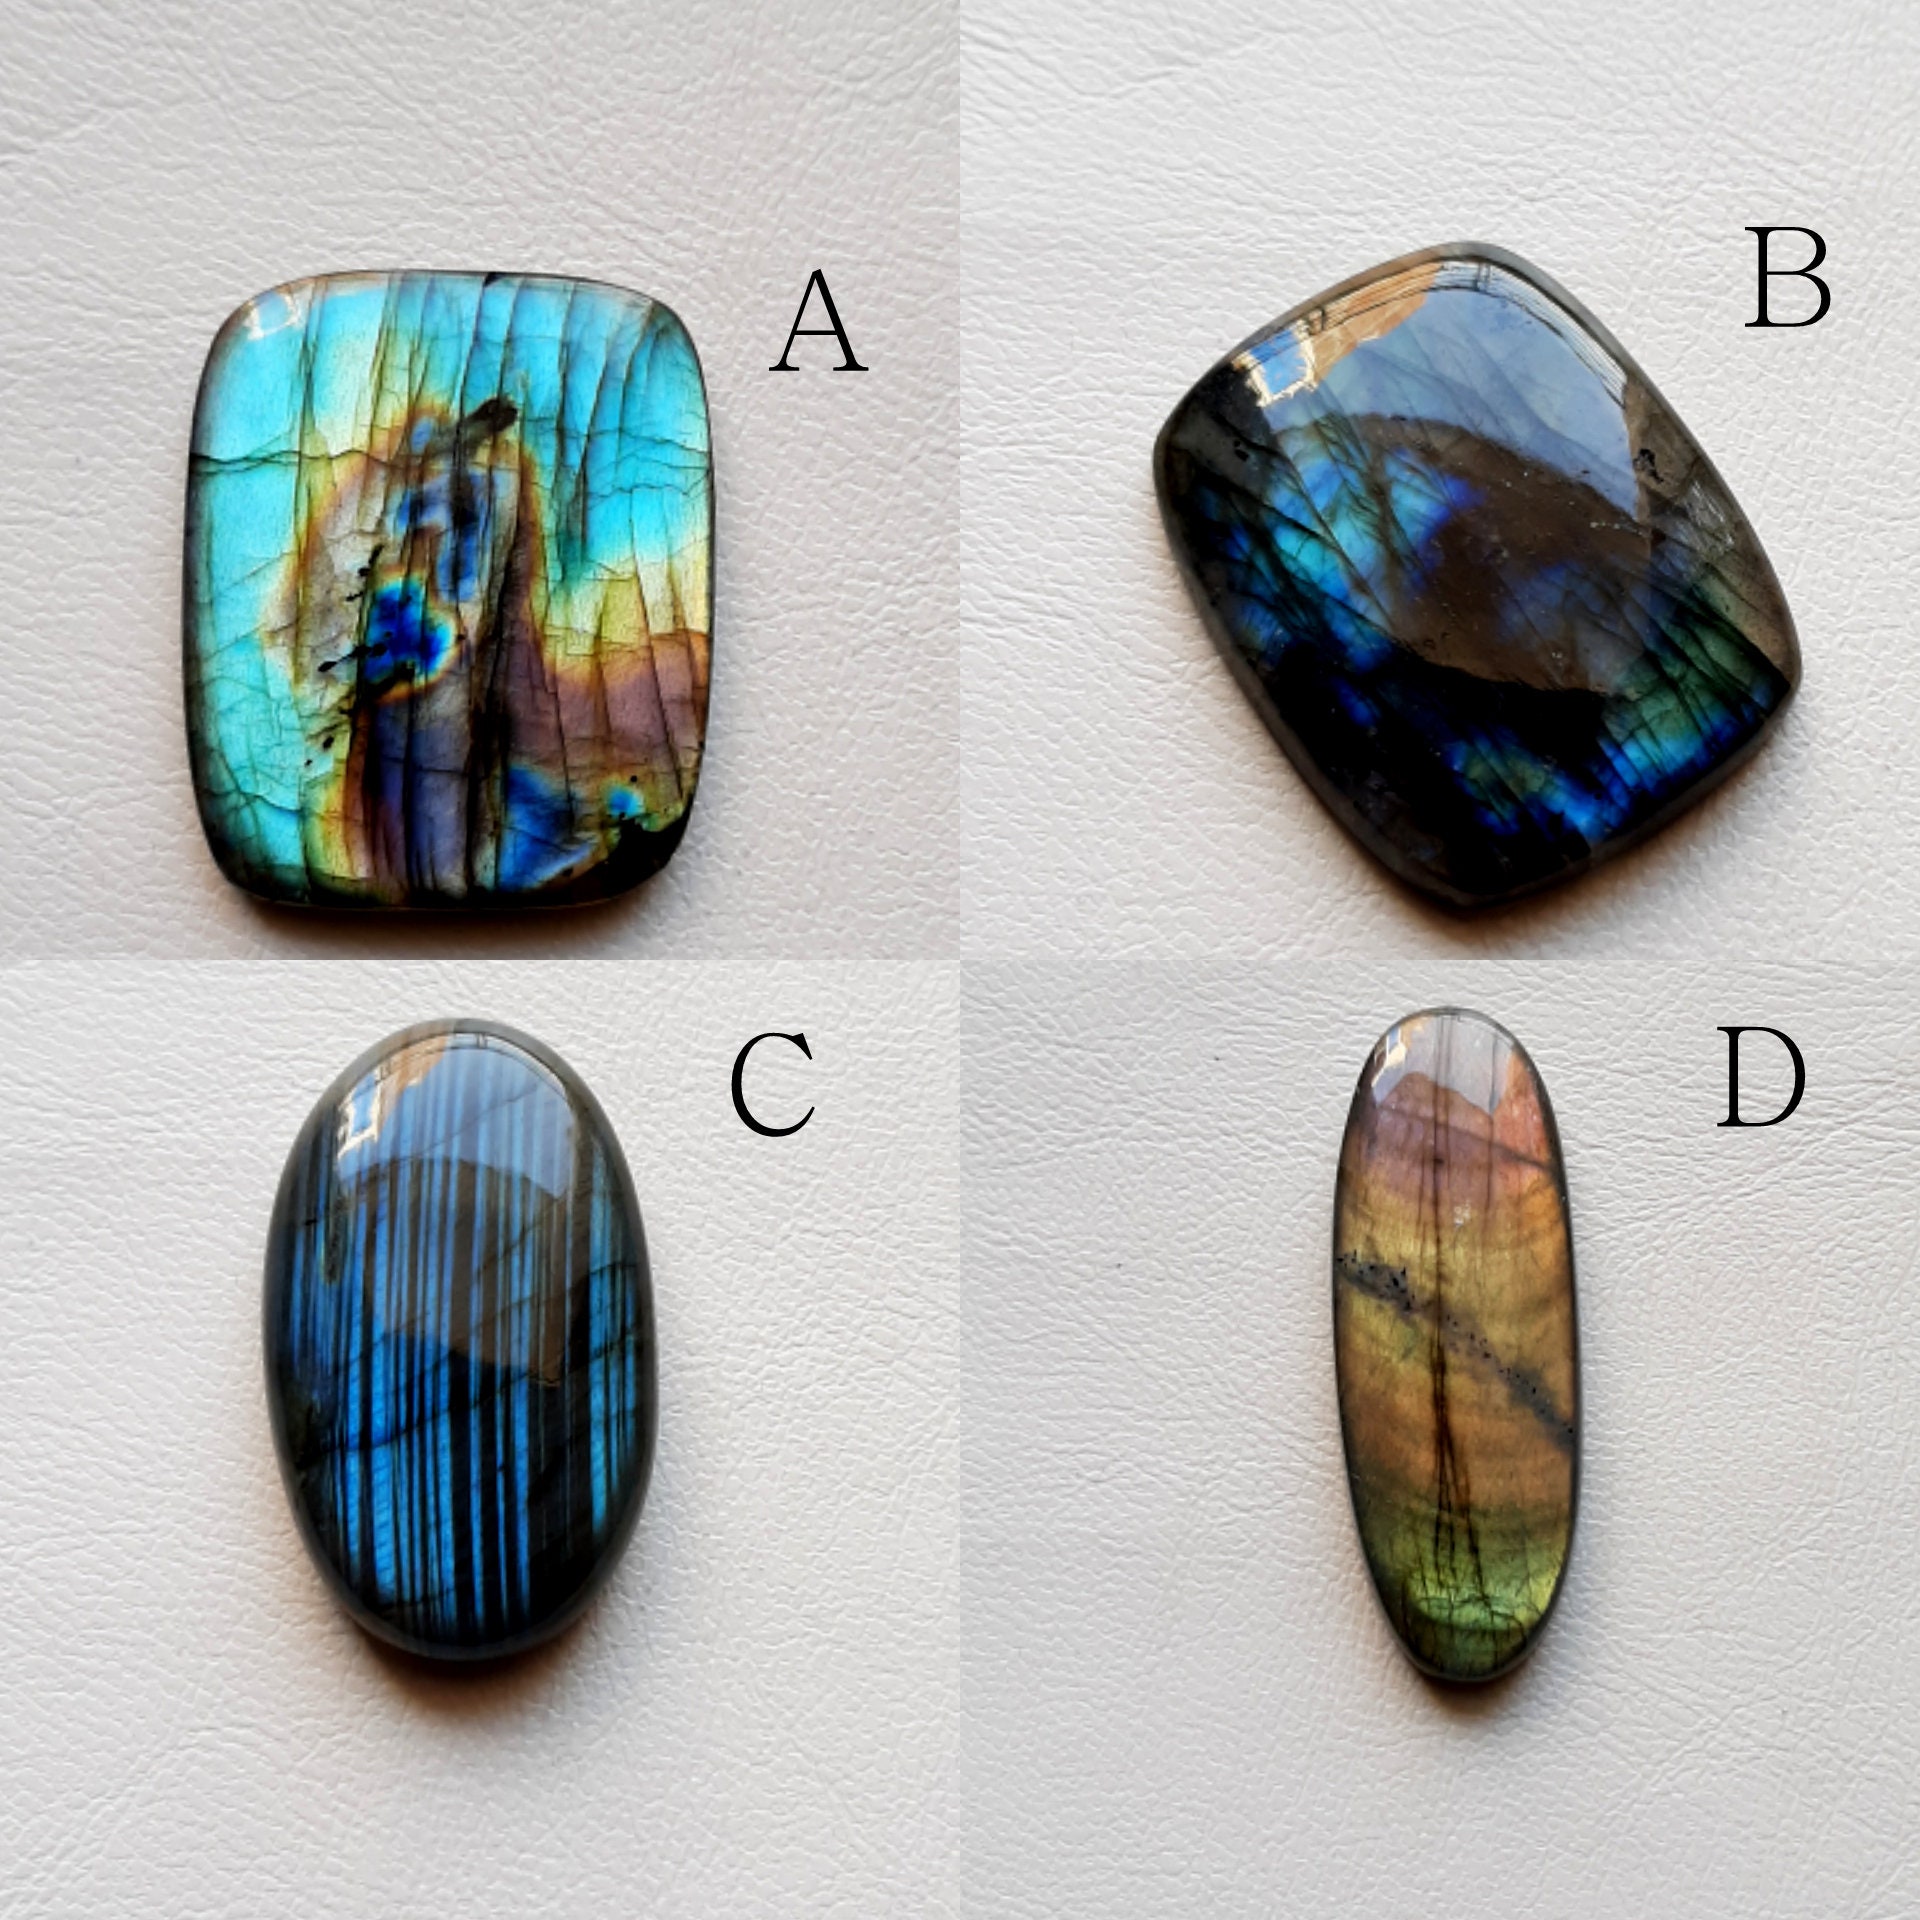 Necklace Pendant Labradorite Cabochon Loose Gemstone for Jewelry Making 58823 High Polish AAA+ Labradorite for Handmade Jewelry